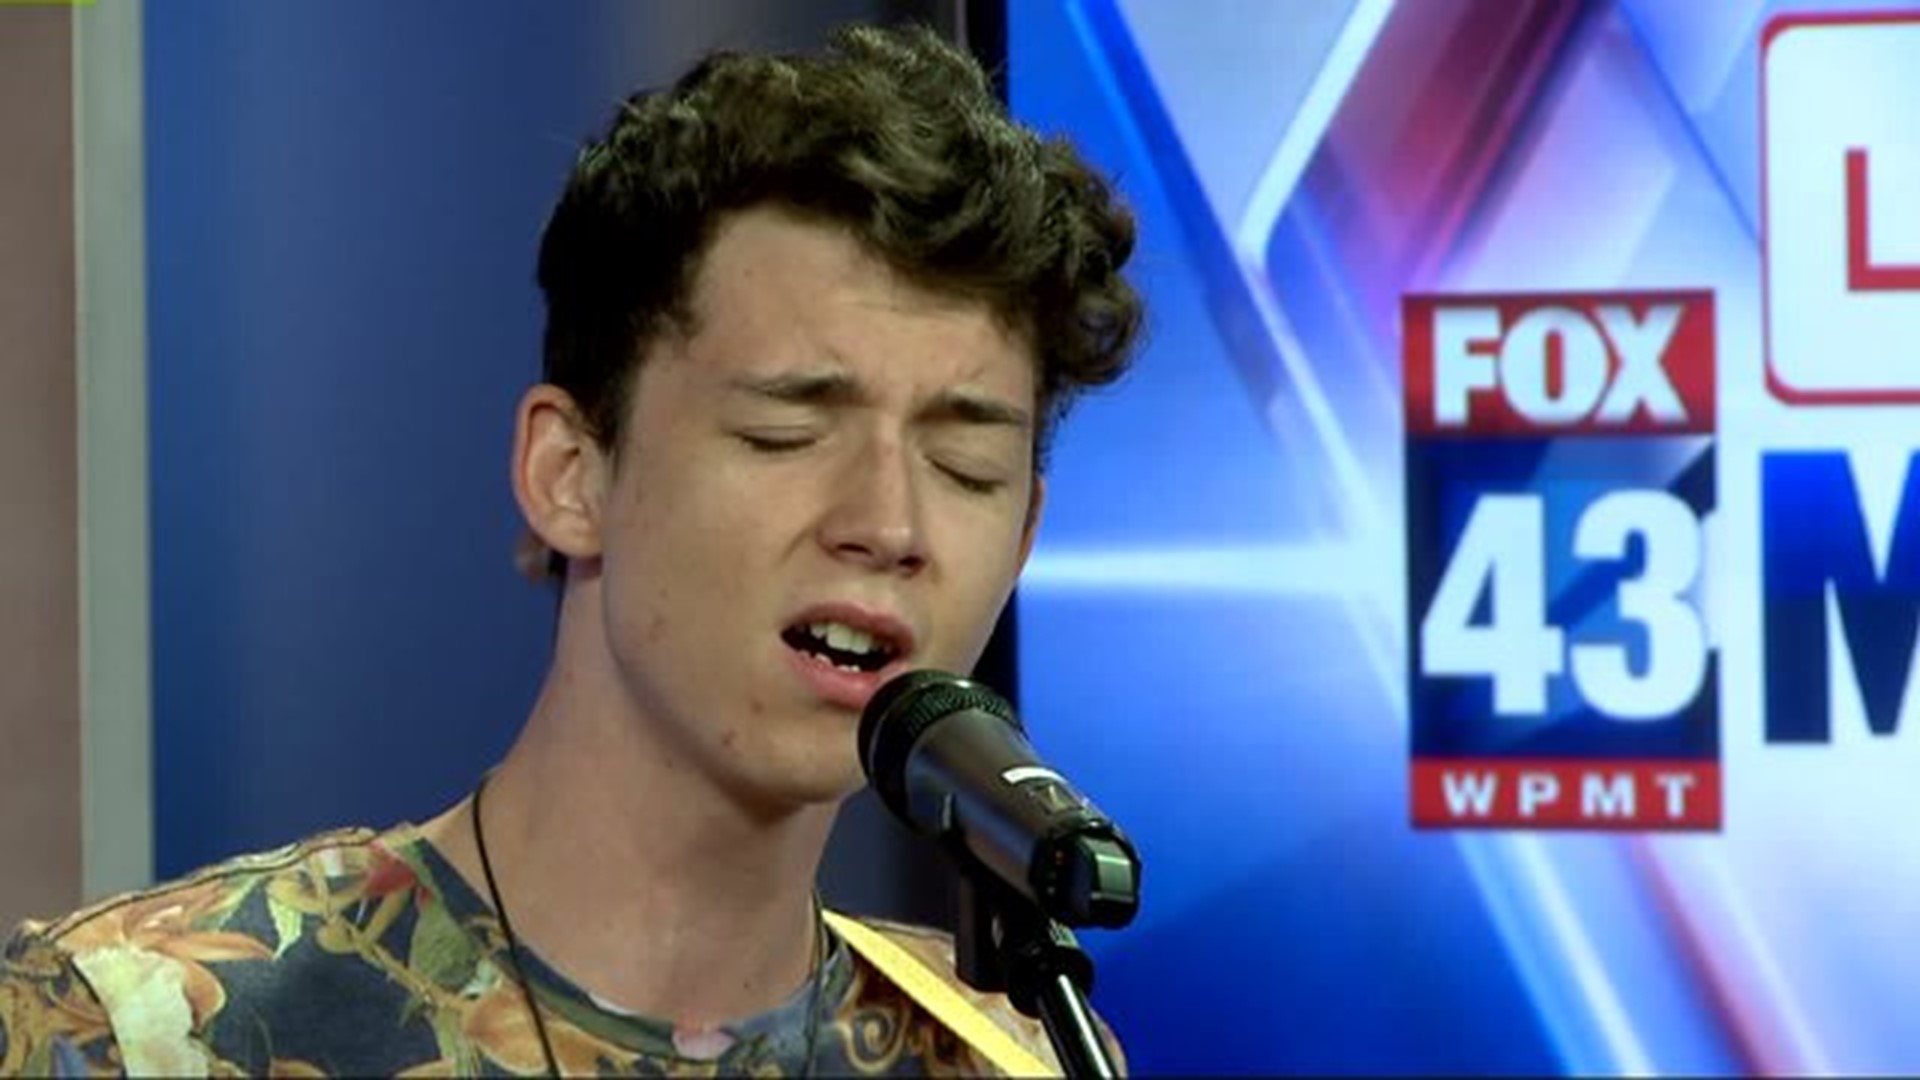 Local teen uses amazing music talents to cope with bullying